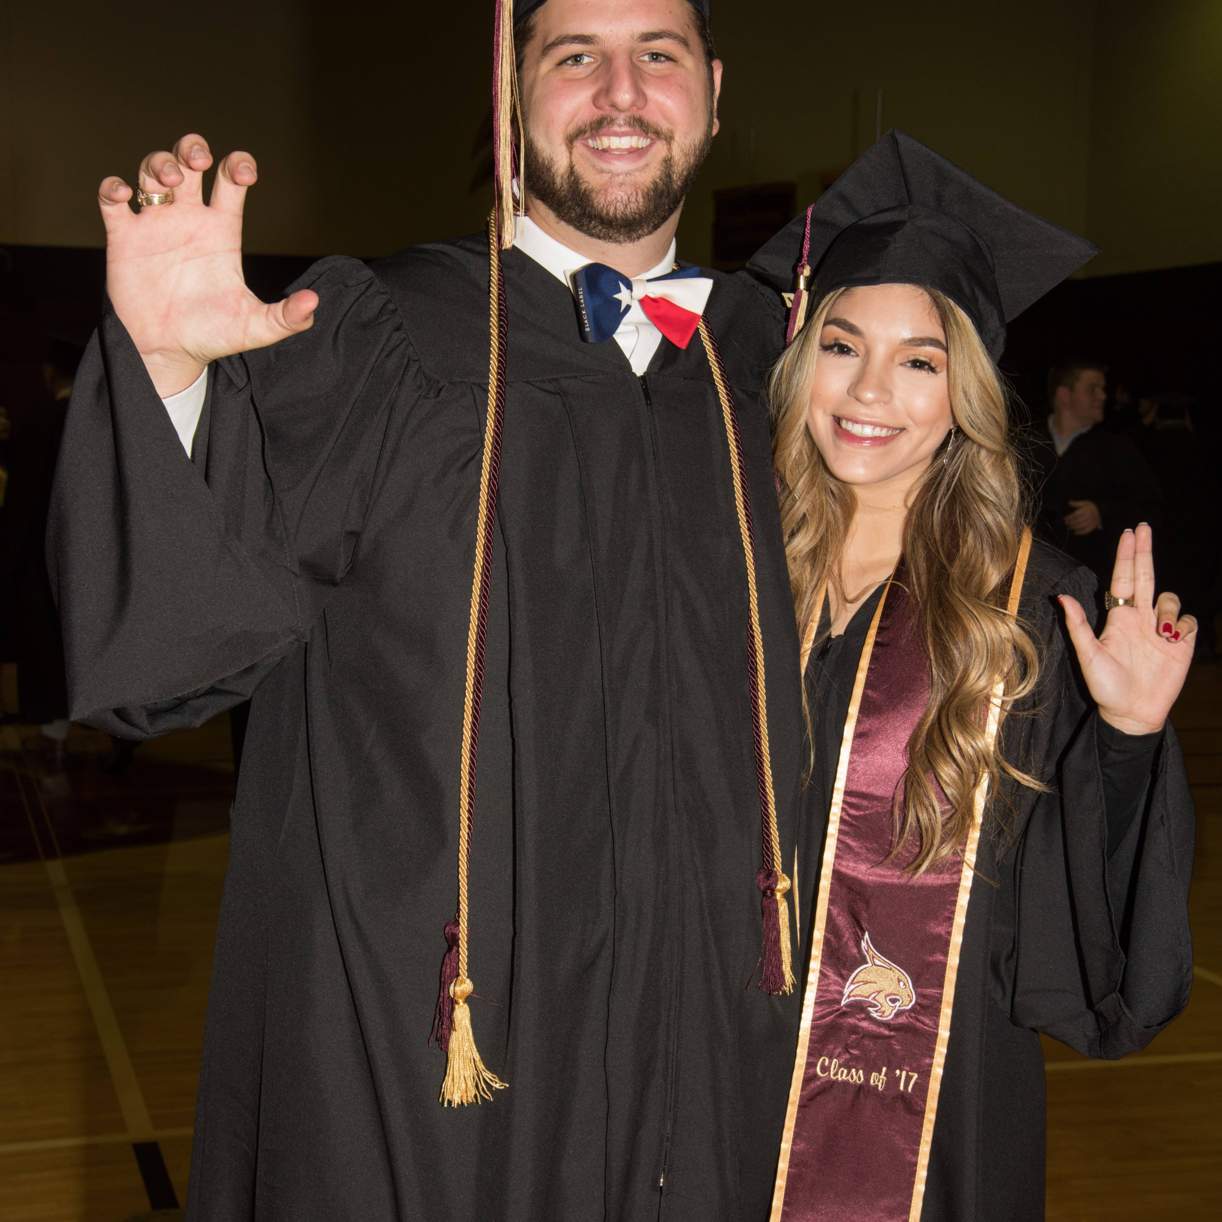 Graduates doing the Texas State hand signs before the ceremony.